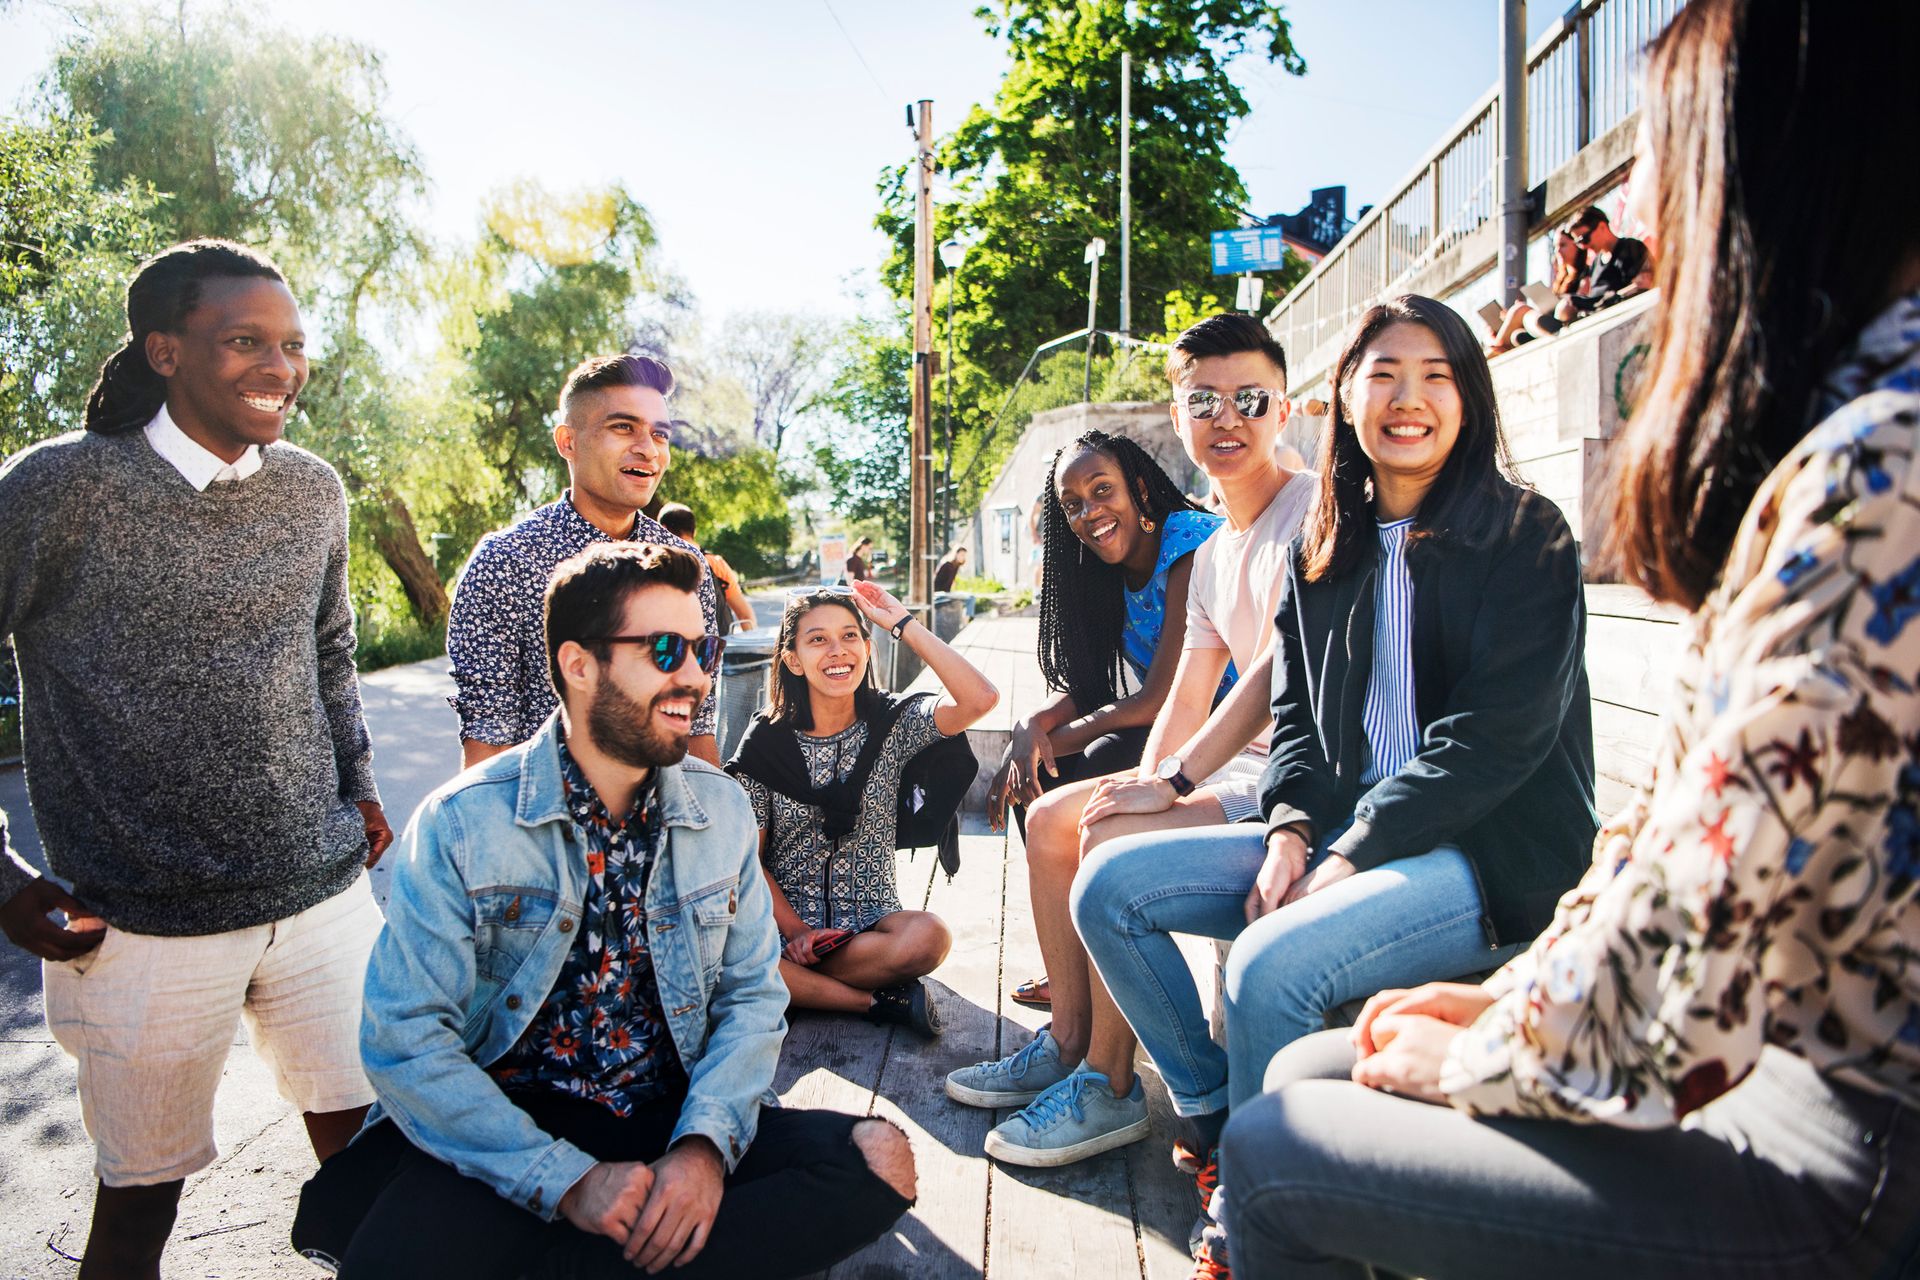 A group of diverse friends are gathered outdoors, enjoying each other's company in a sunlit, casual urban setting, engaging in conversation with expressions of laughter and happiness.